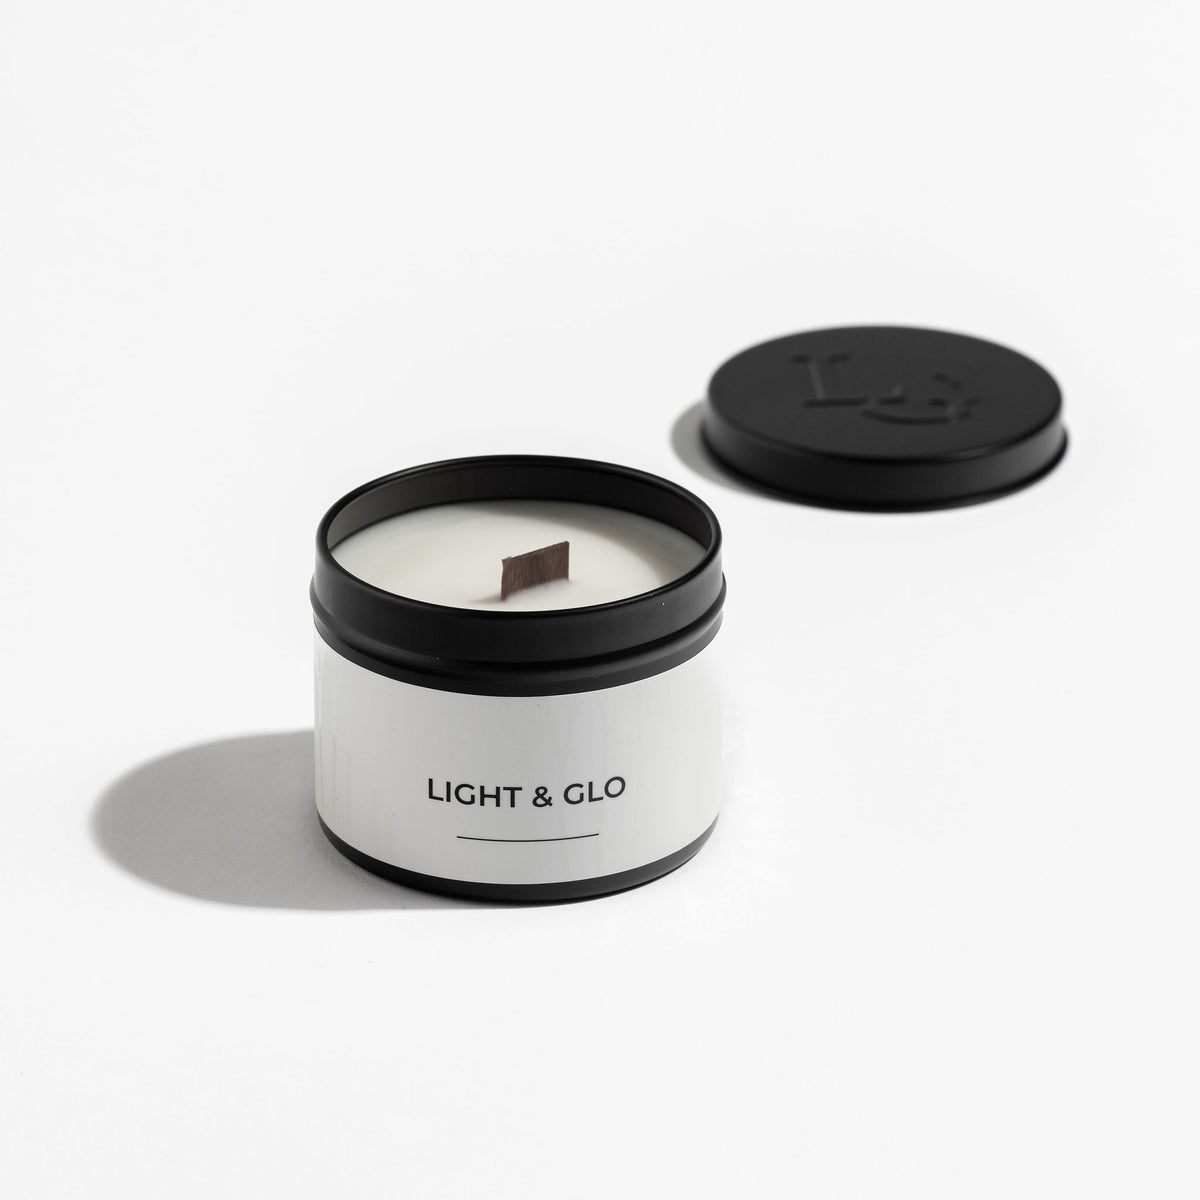 Neroli &amp; Ylang Ylang - Monochrome Travel Candle | Luxury Candles &amp; Home Fragrances by Light + Glo